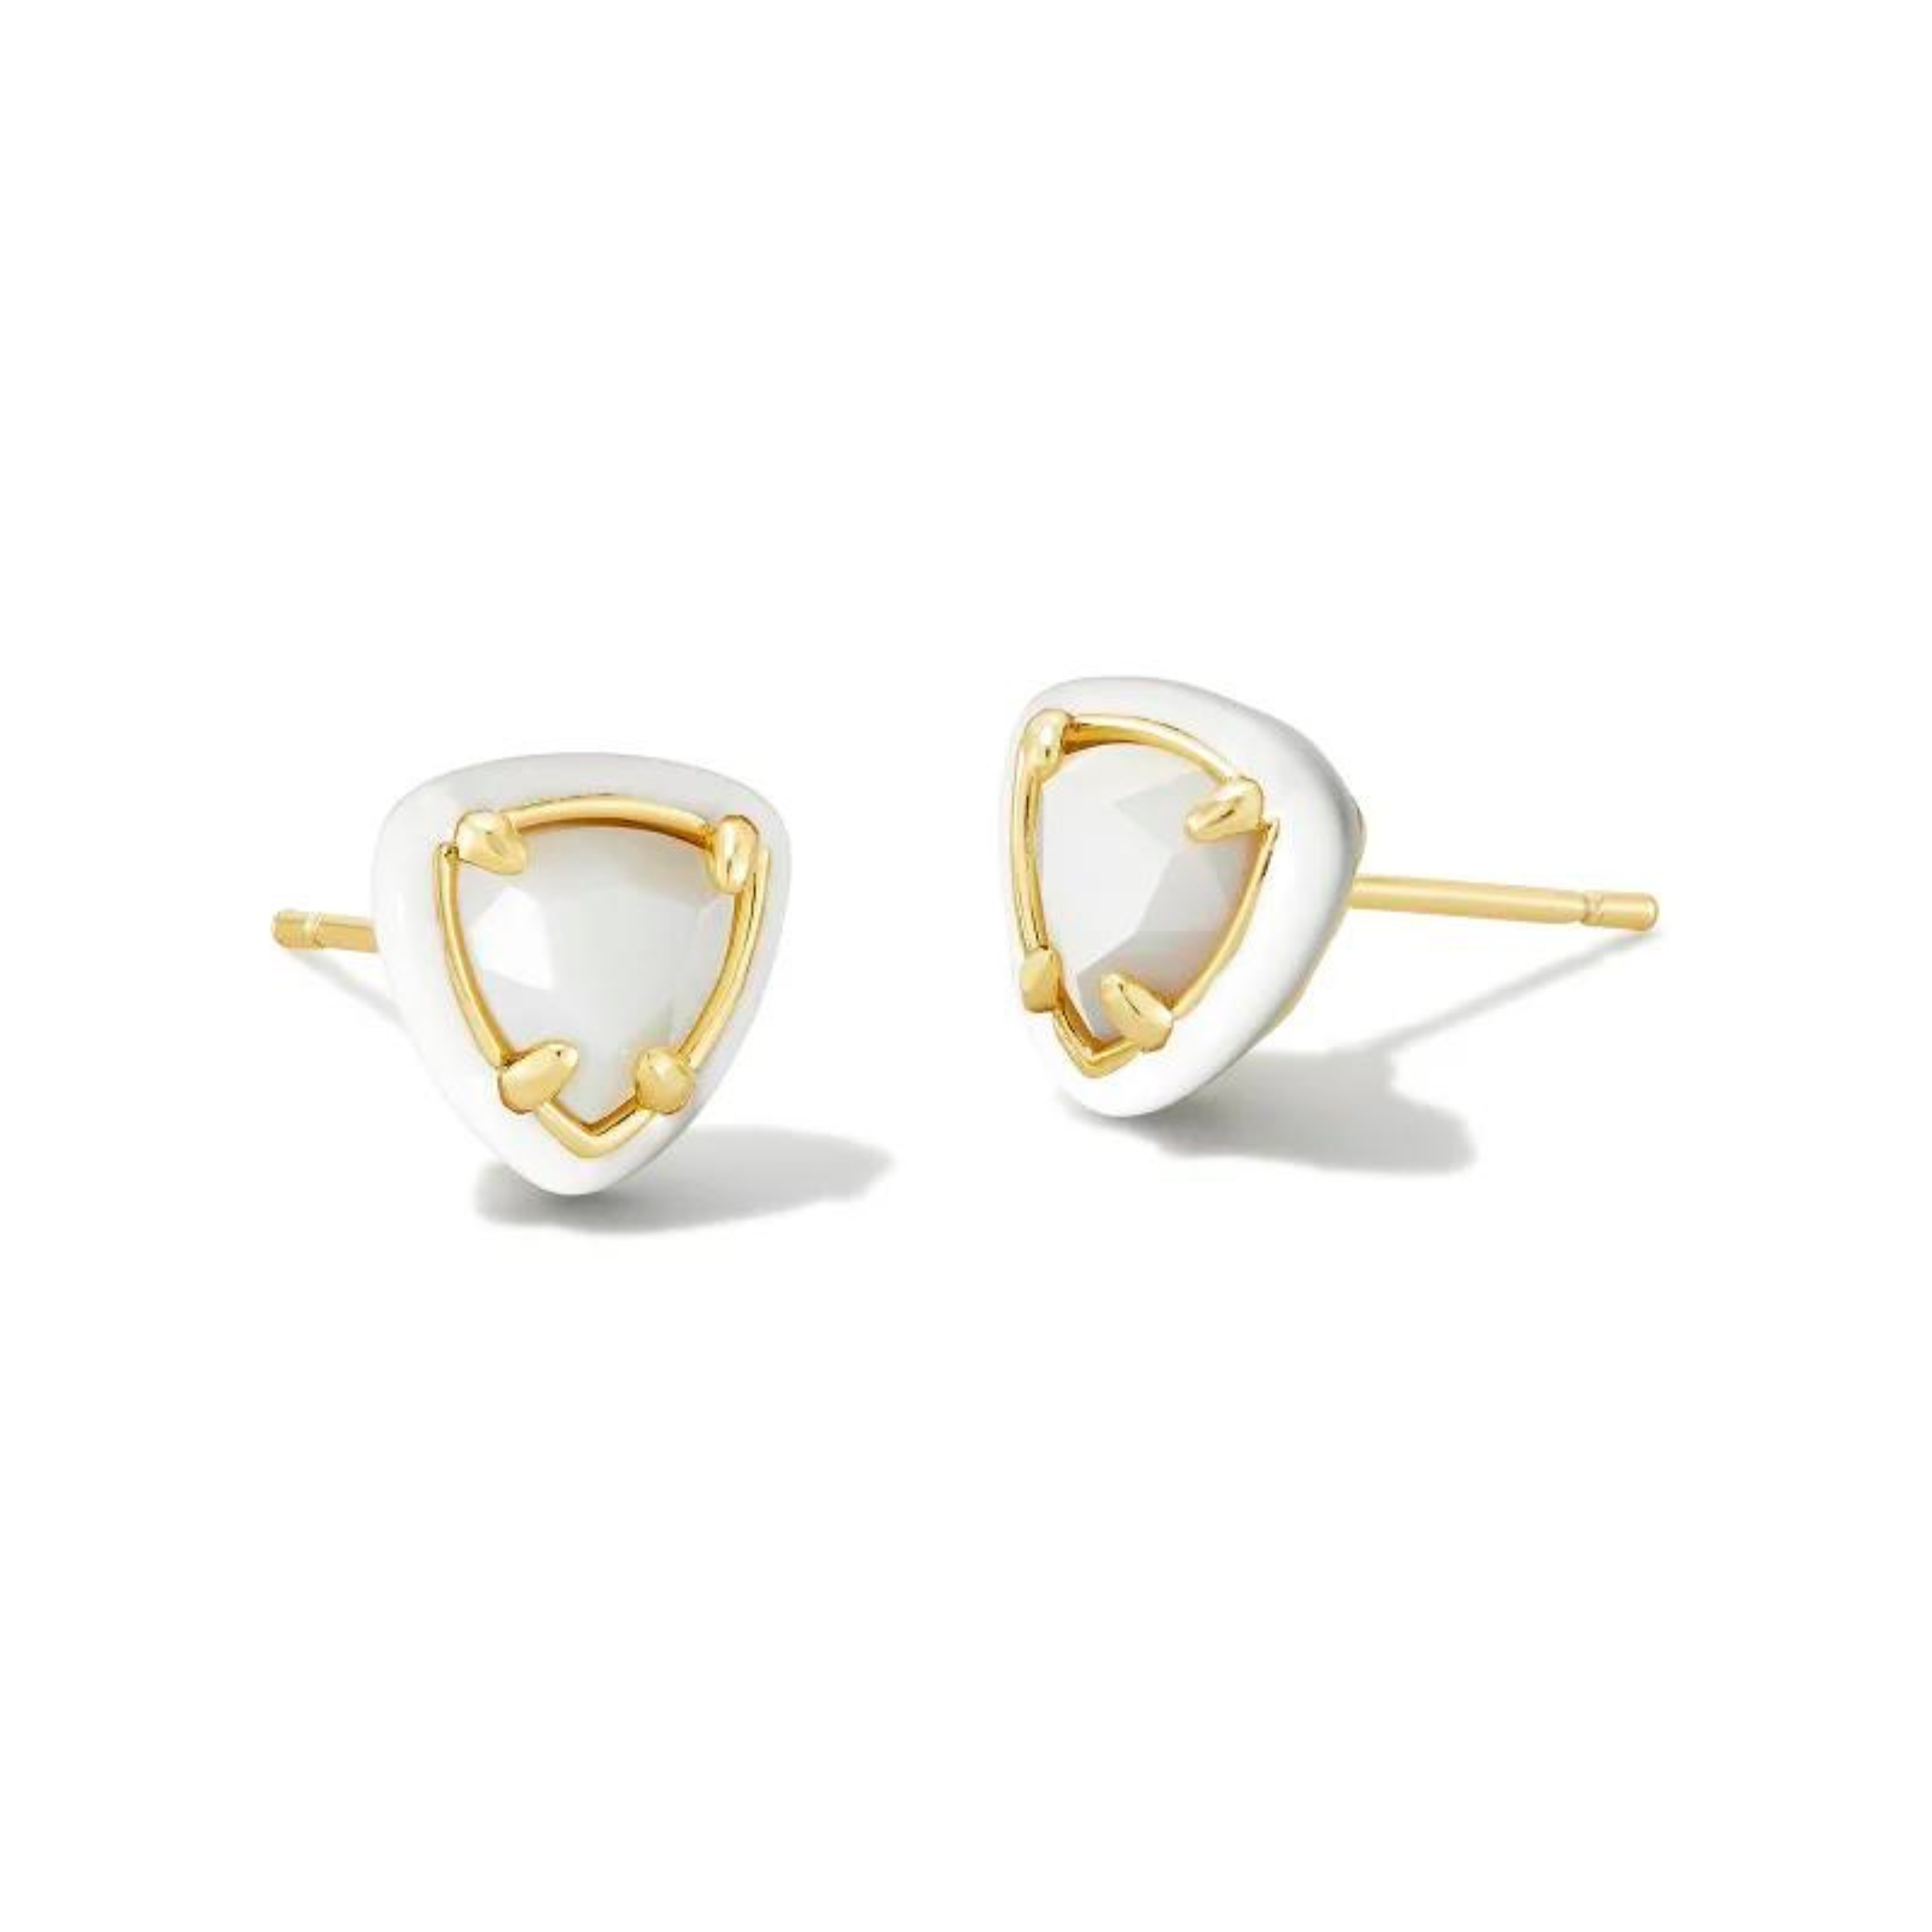 White framed, triangle shaped stud earrings with a center white stone and a gold ear post. These earrings are pictured on a white background.